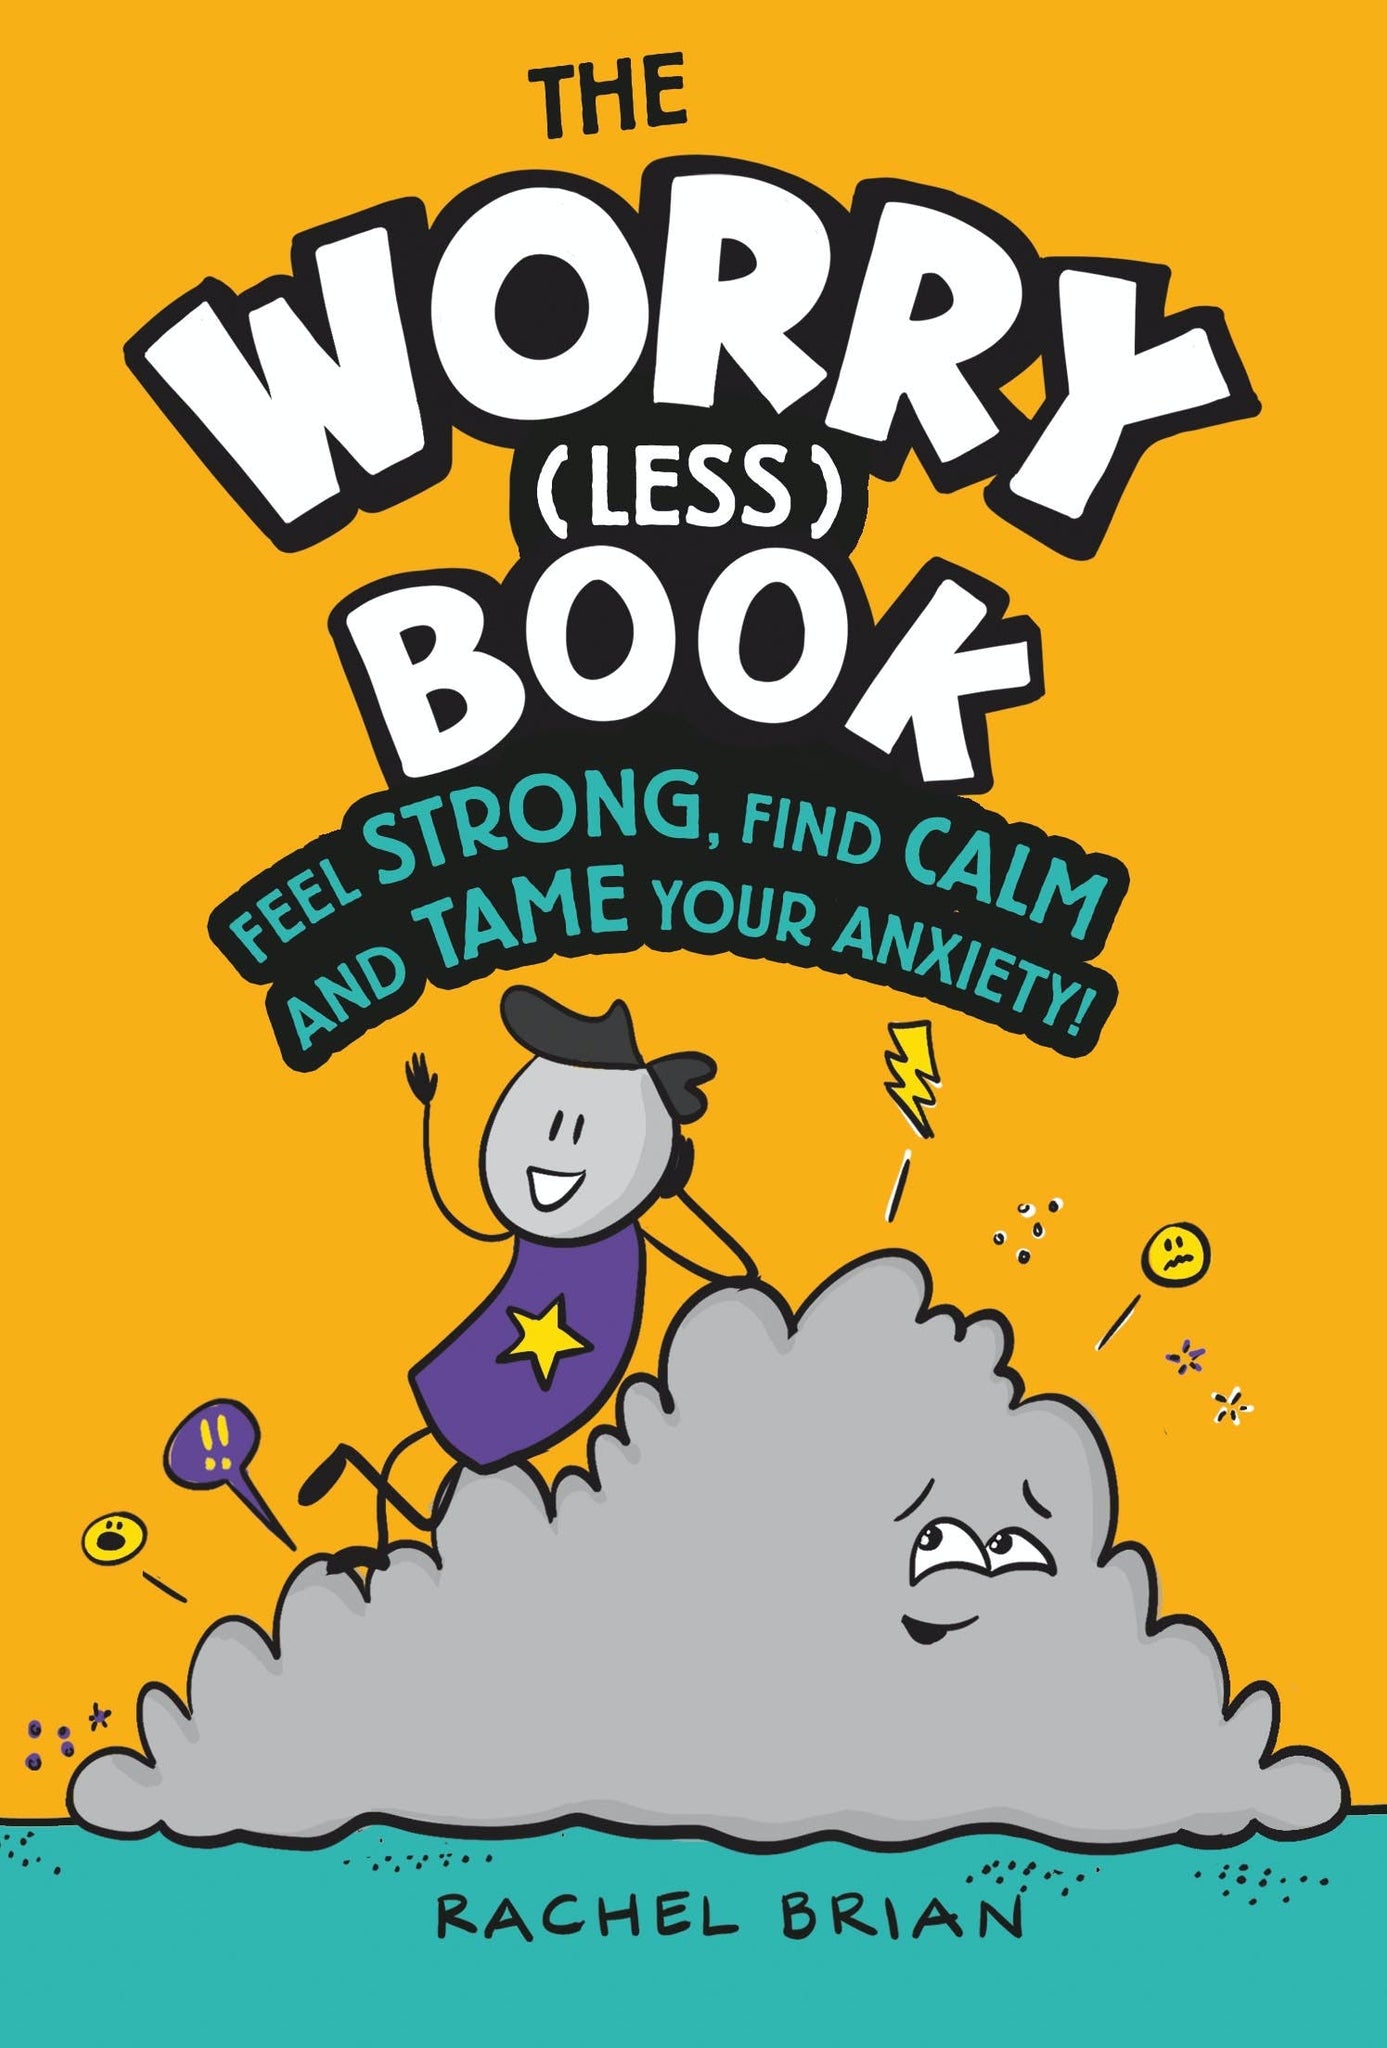 The Worry (Less) Book: Feel Strong, Find Calm and Tame Your Anxiety